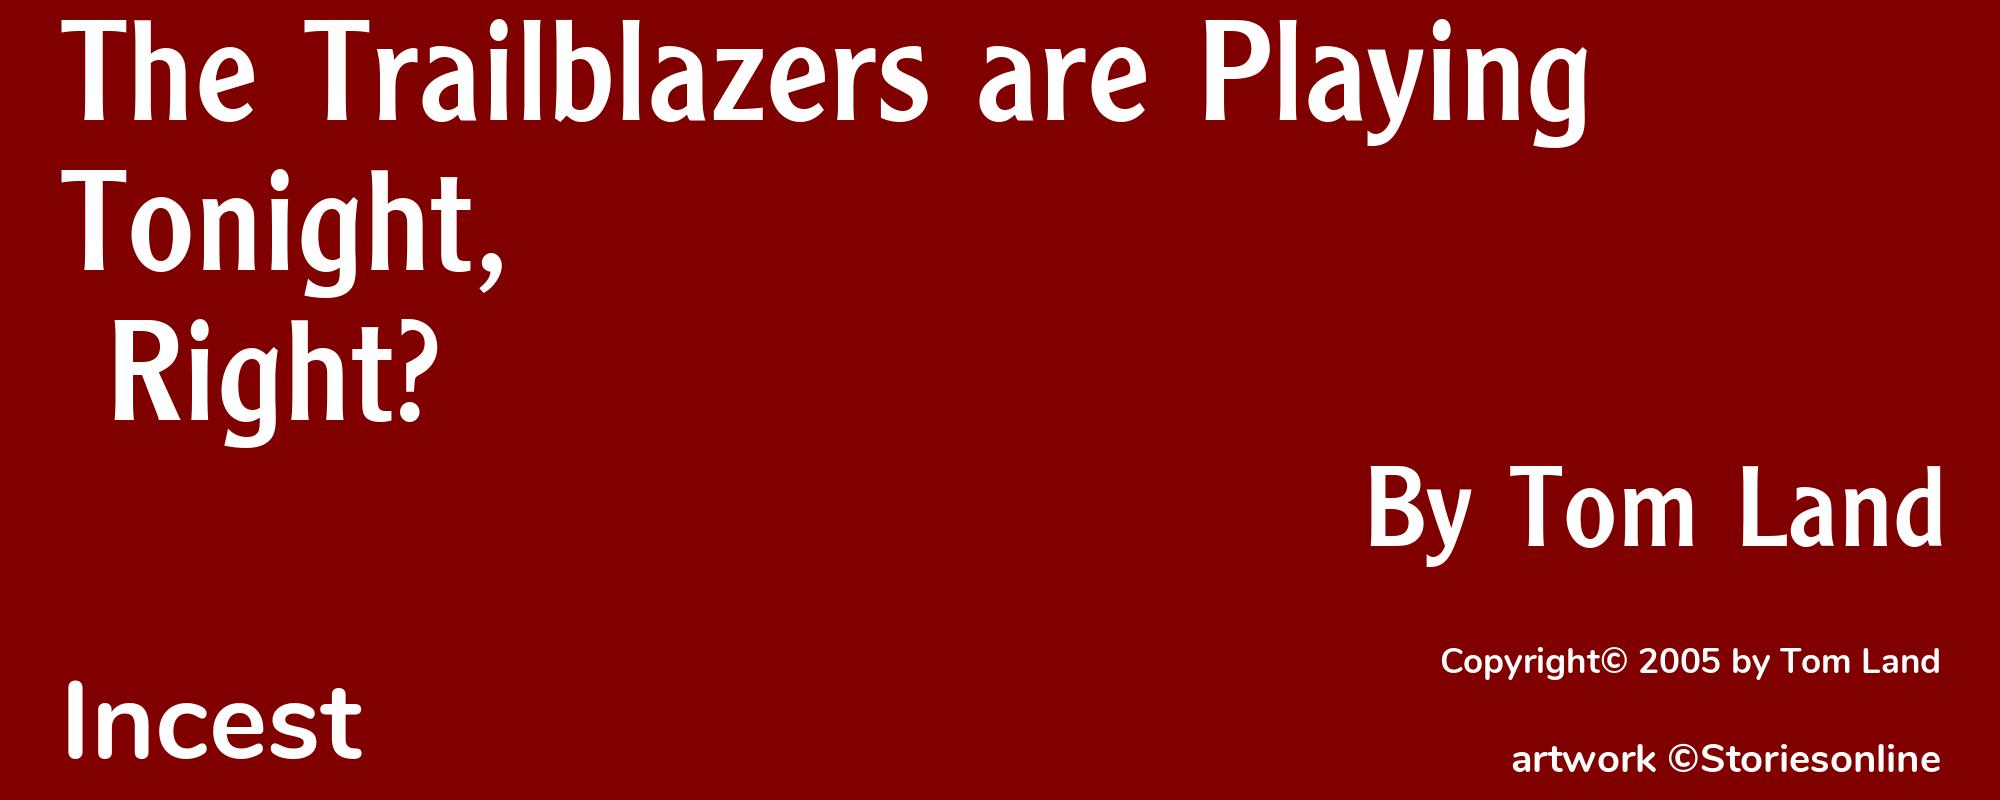 The Trailblazers are Playing Tonight, Right? - Cover